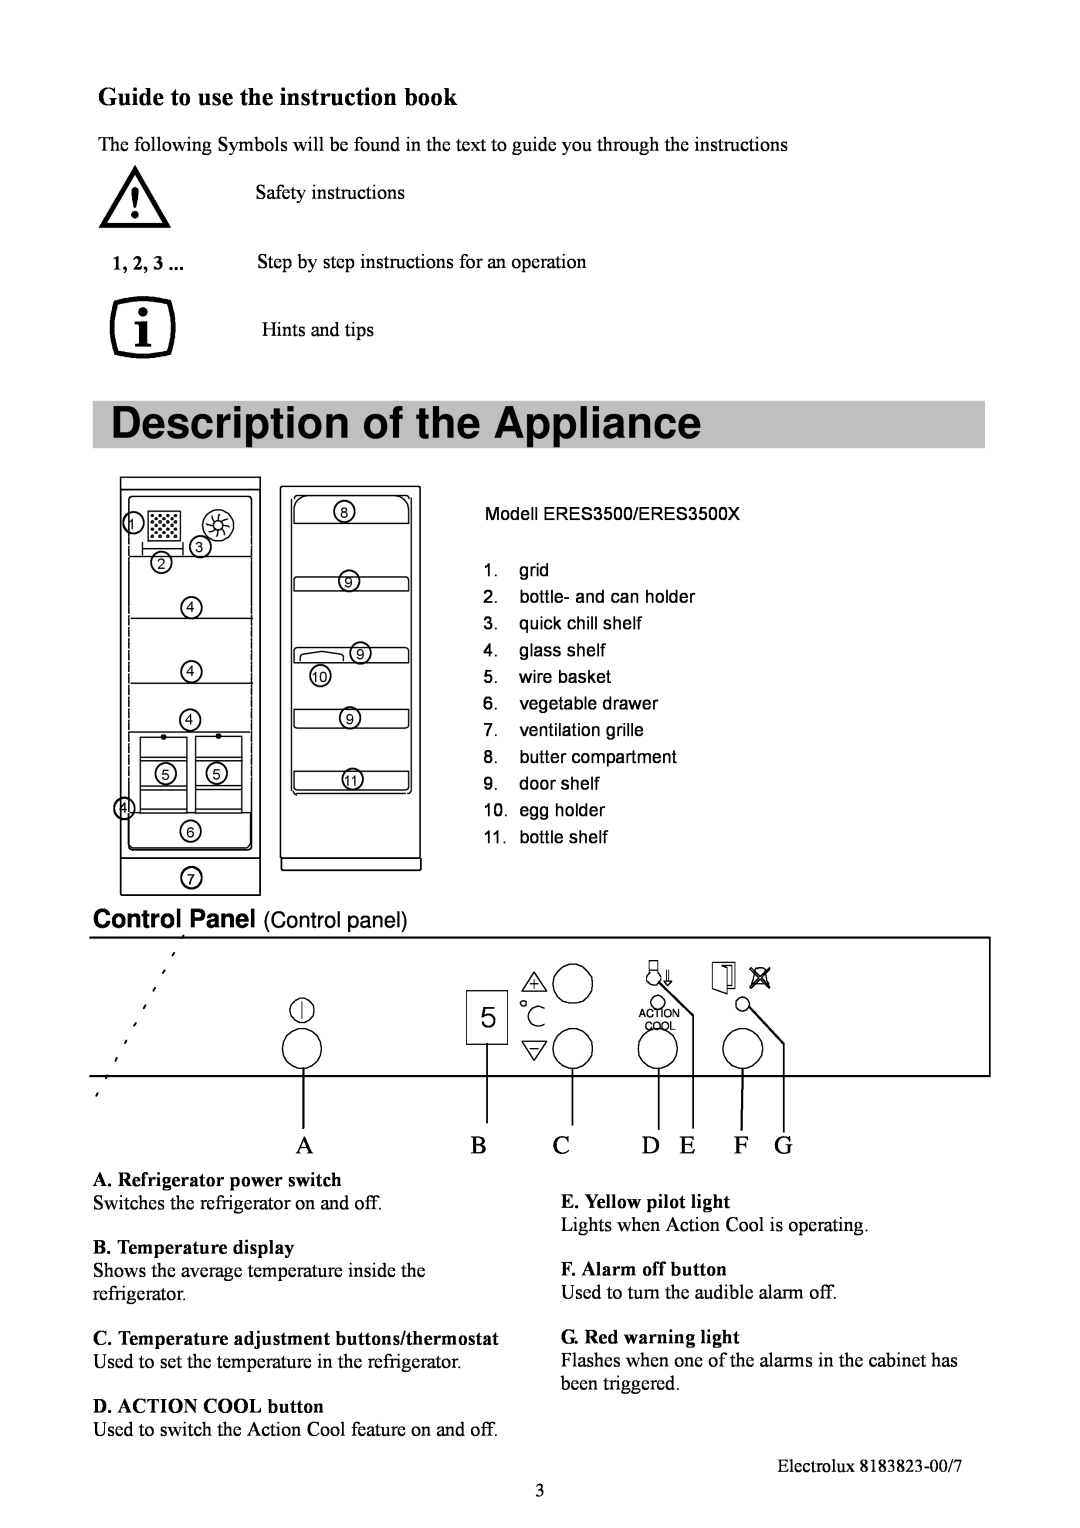 Electrolux ERES3500 manual Description of the Appliance, Control Panel Control panel, Guide to use the instruction book 